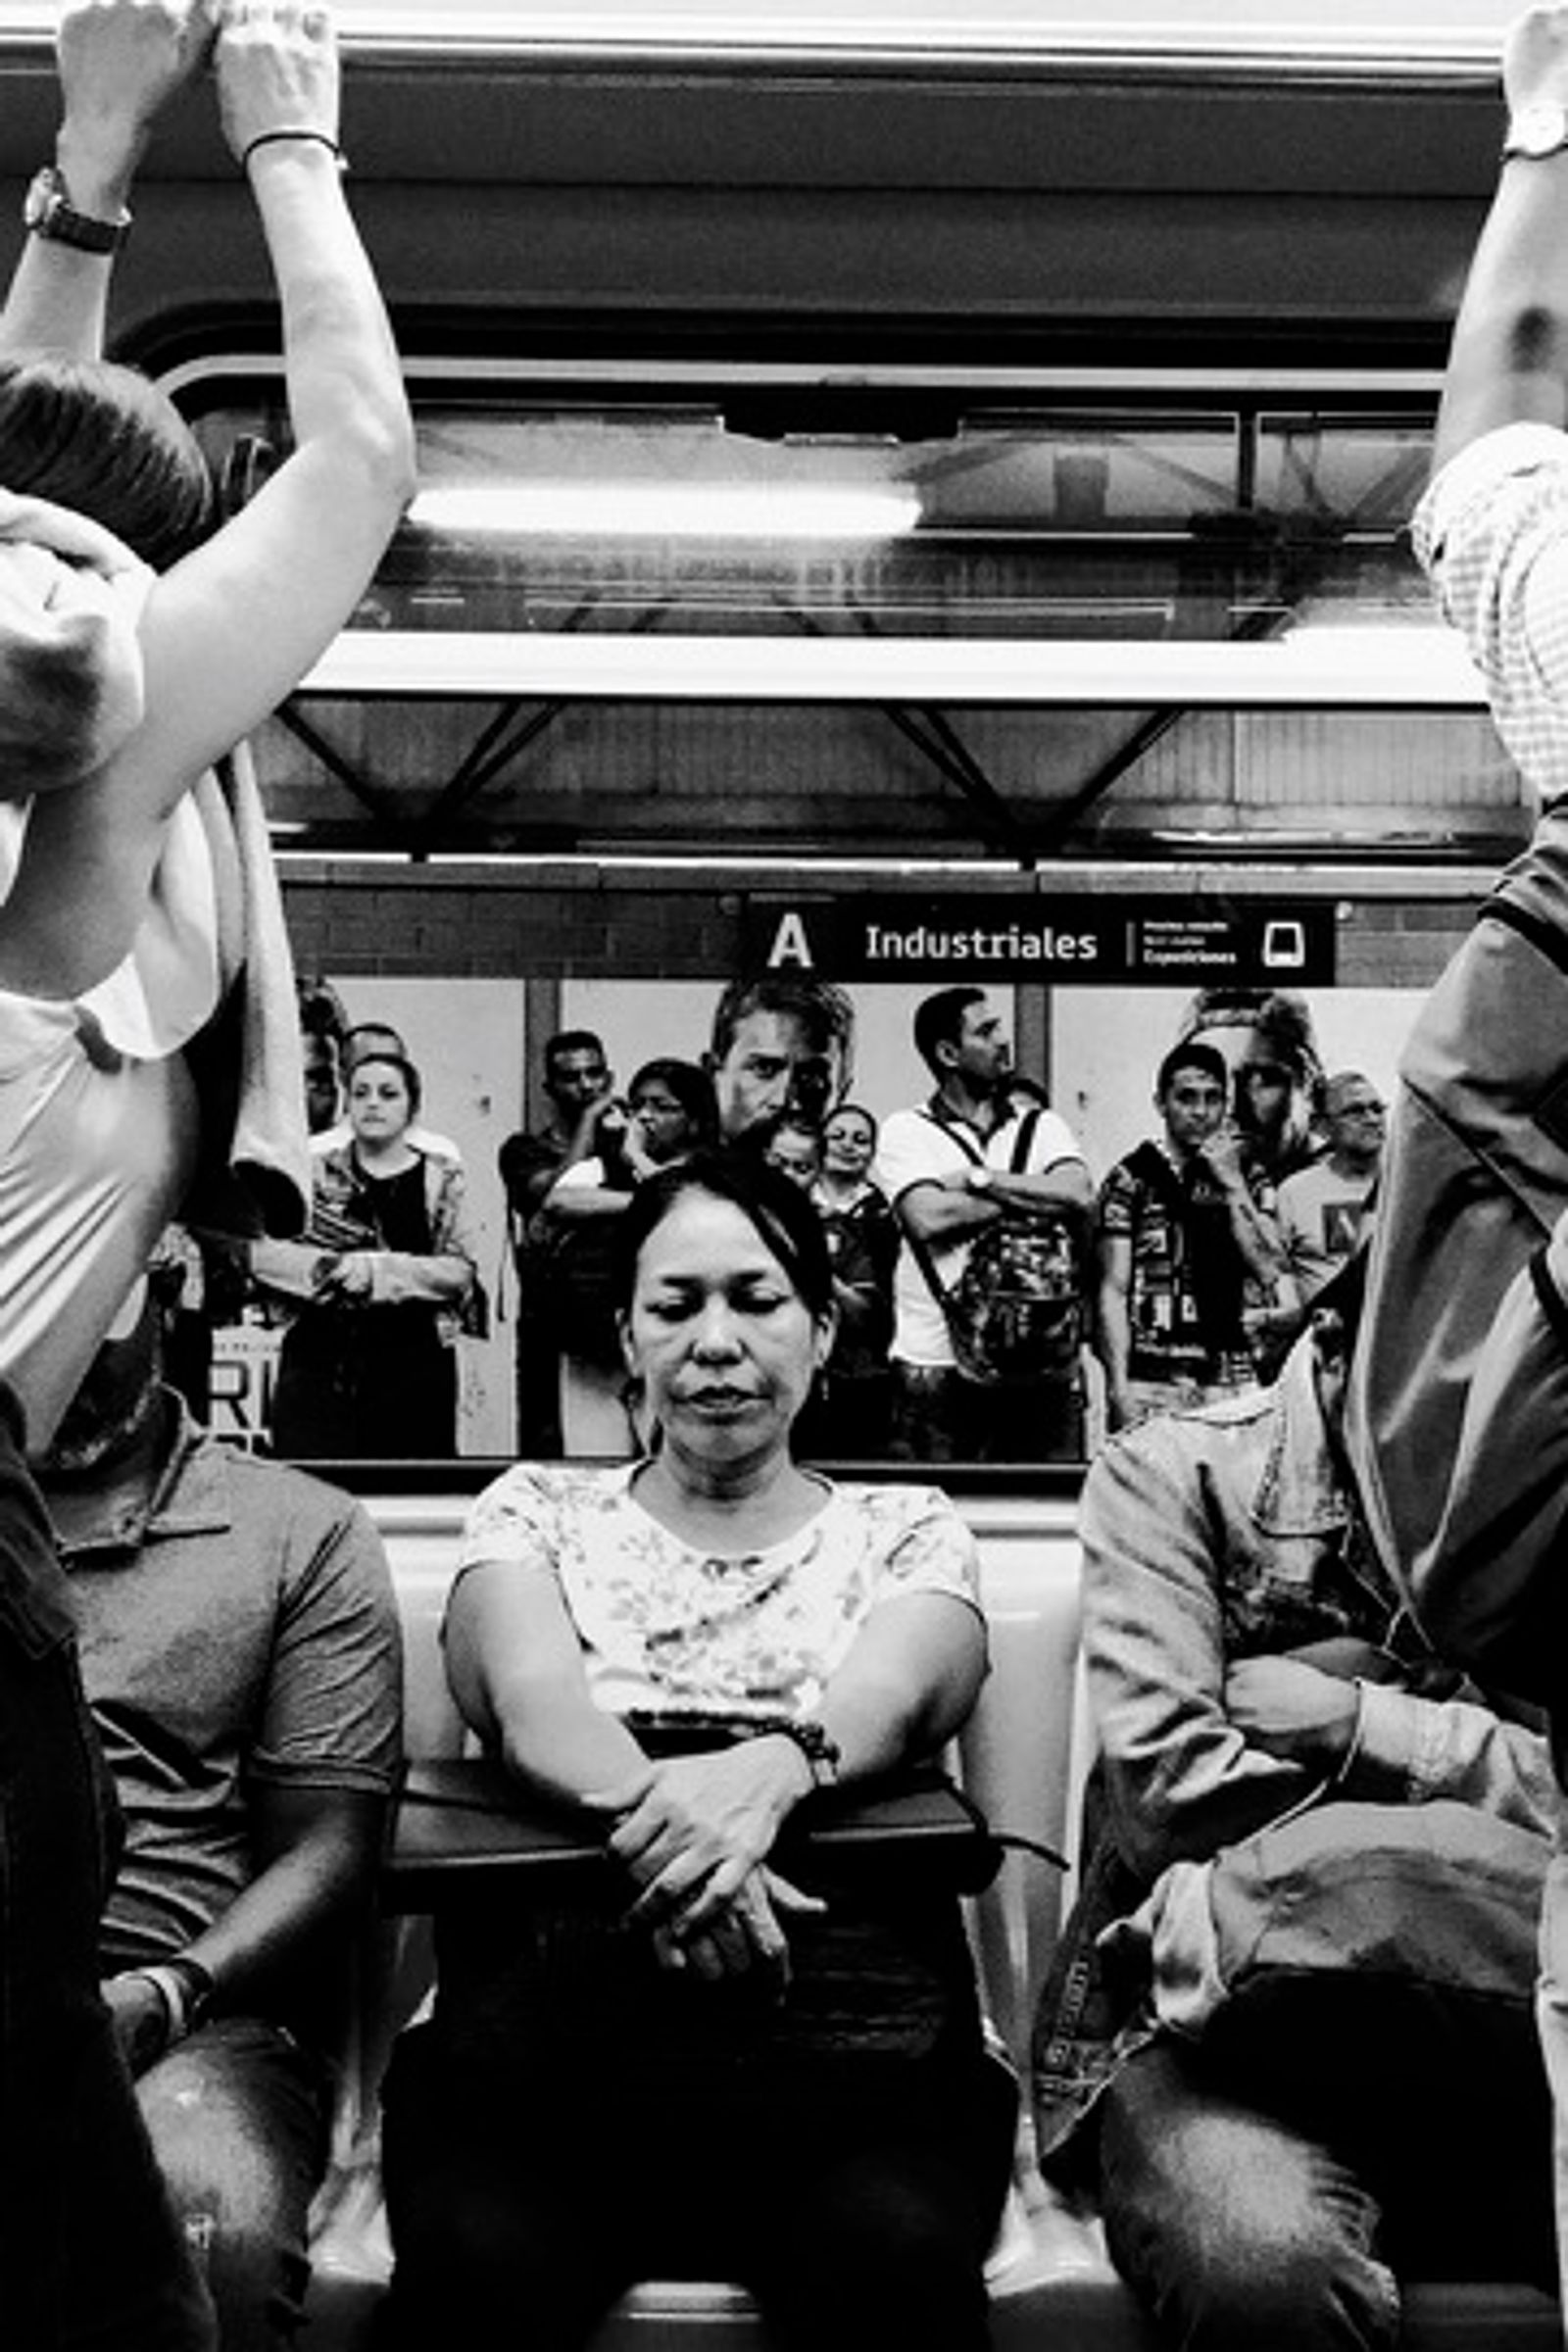 © Camila Giraldo - Image from the Metro stories photography project